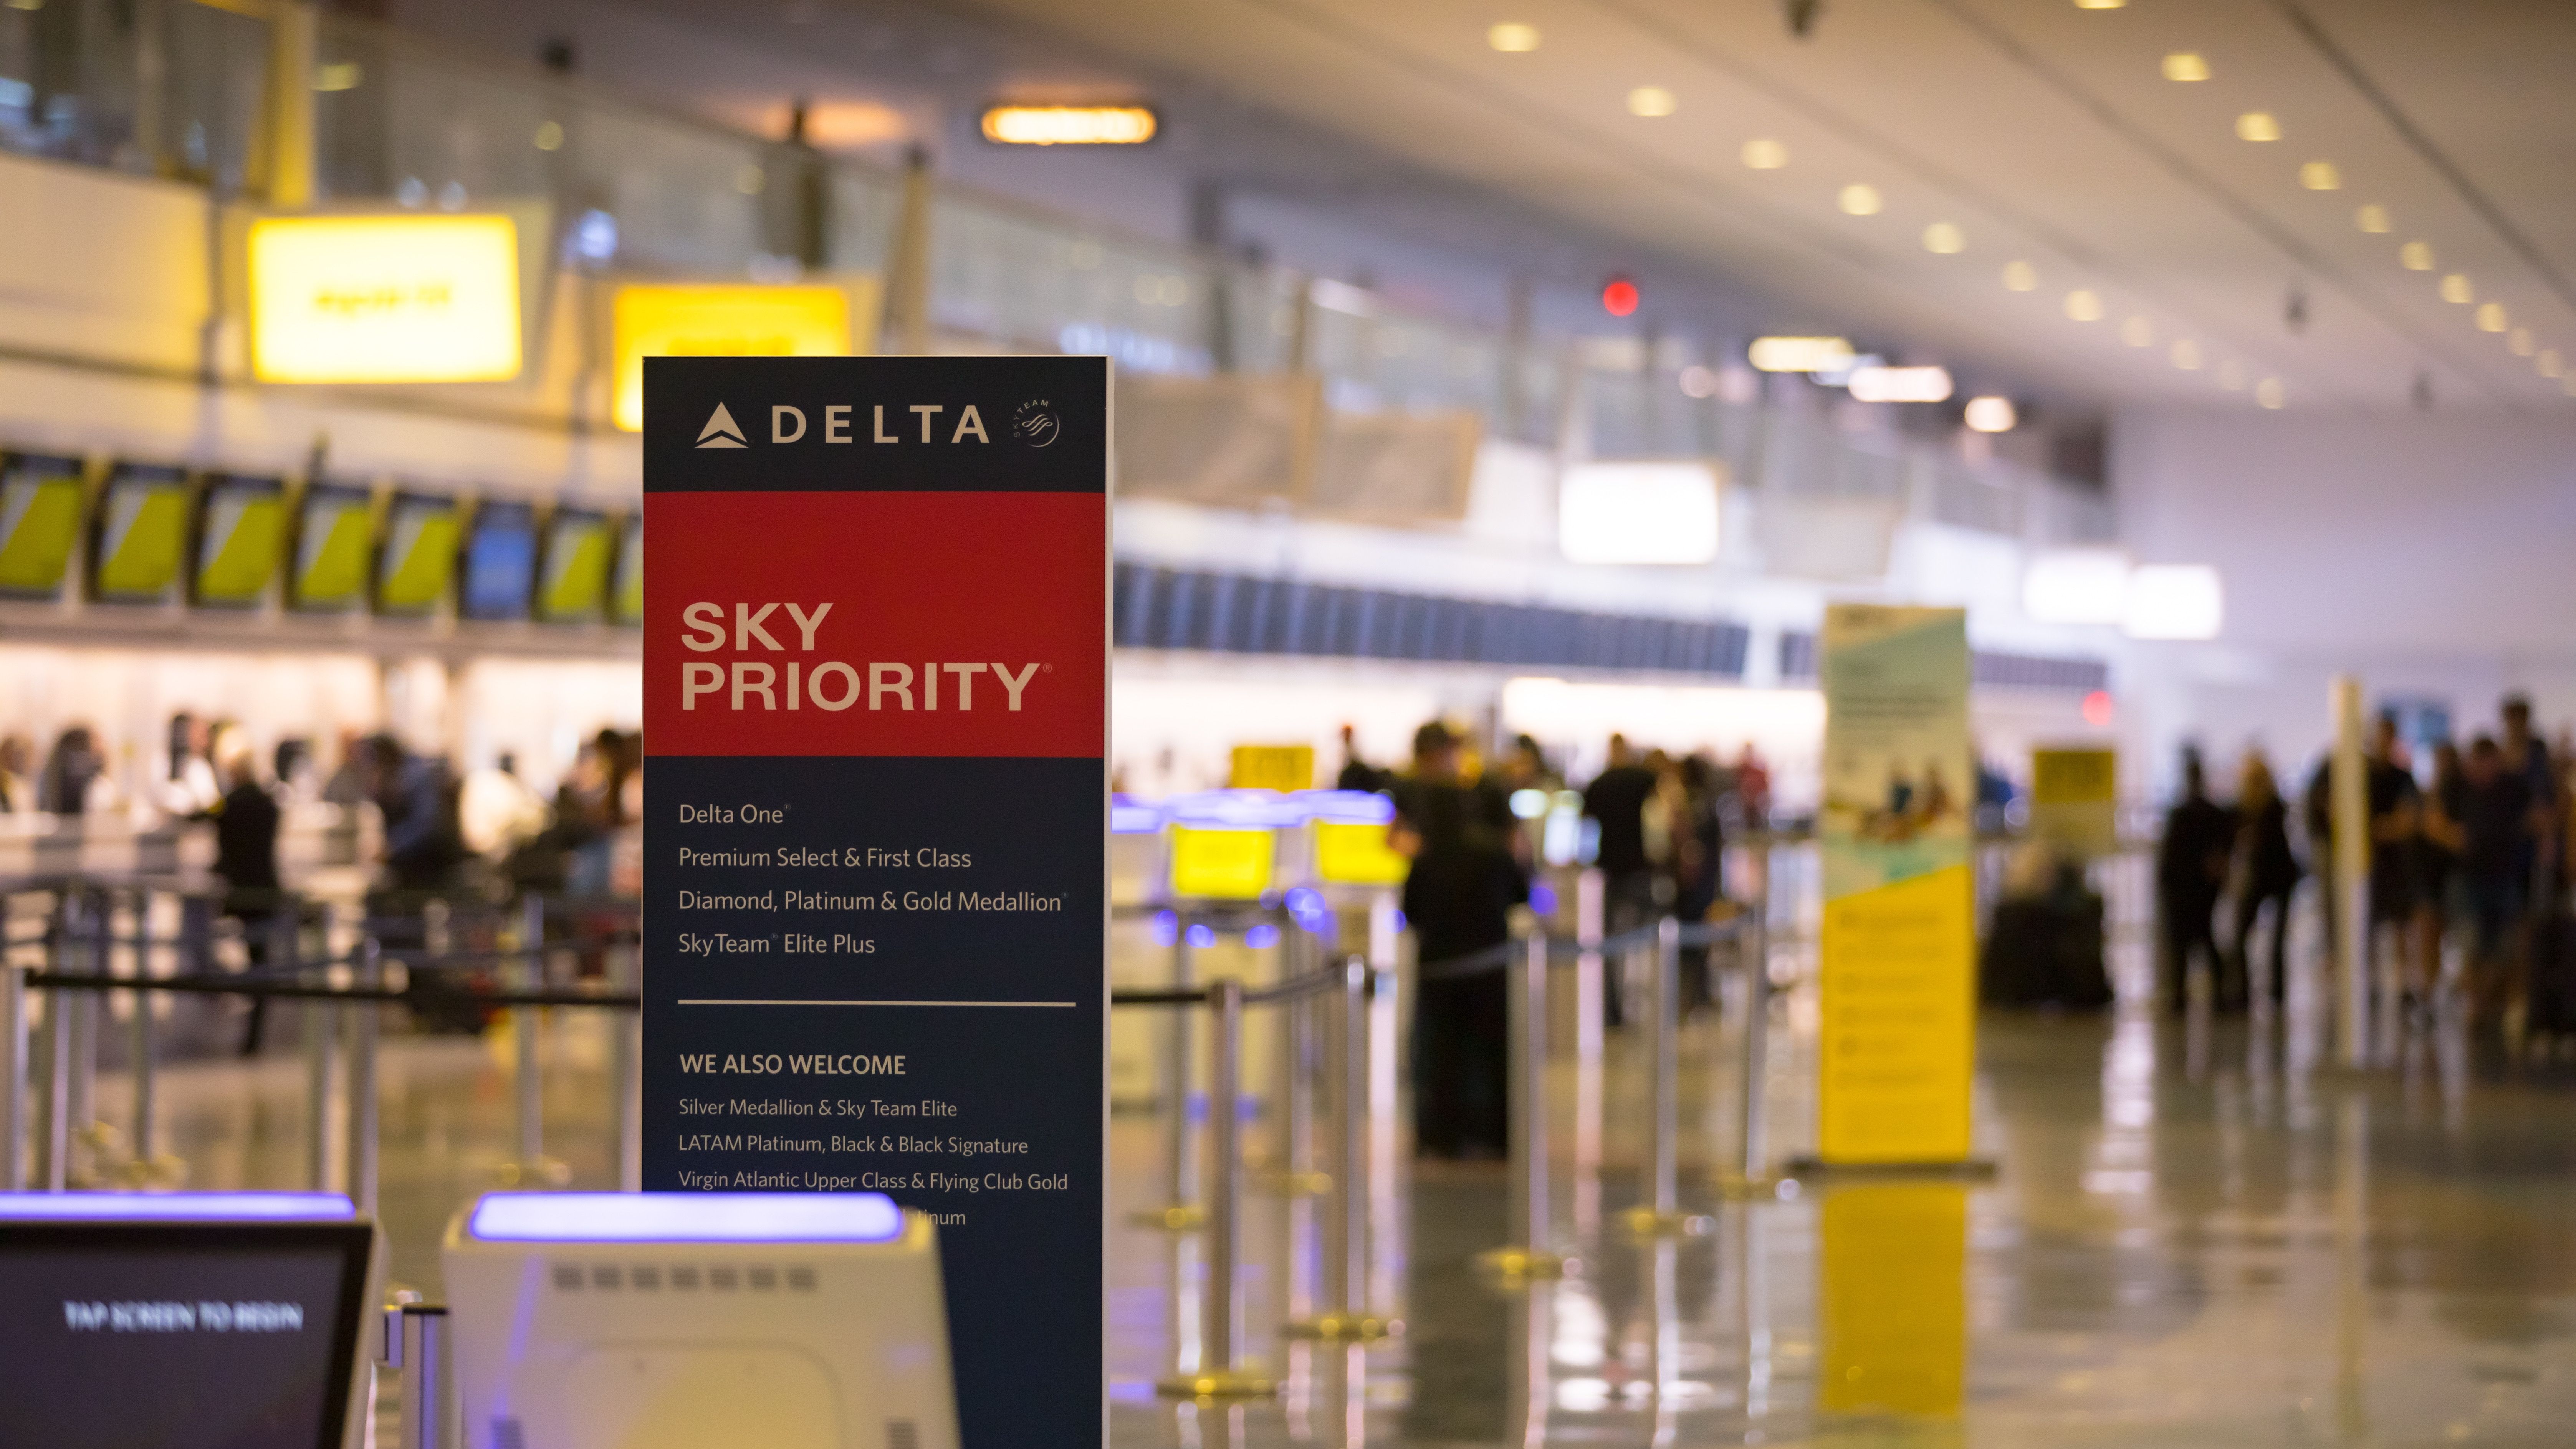 Delta Air Lines Check In counter.